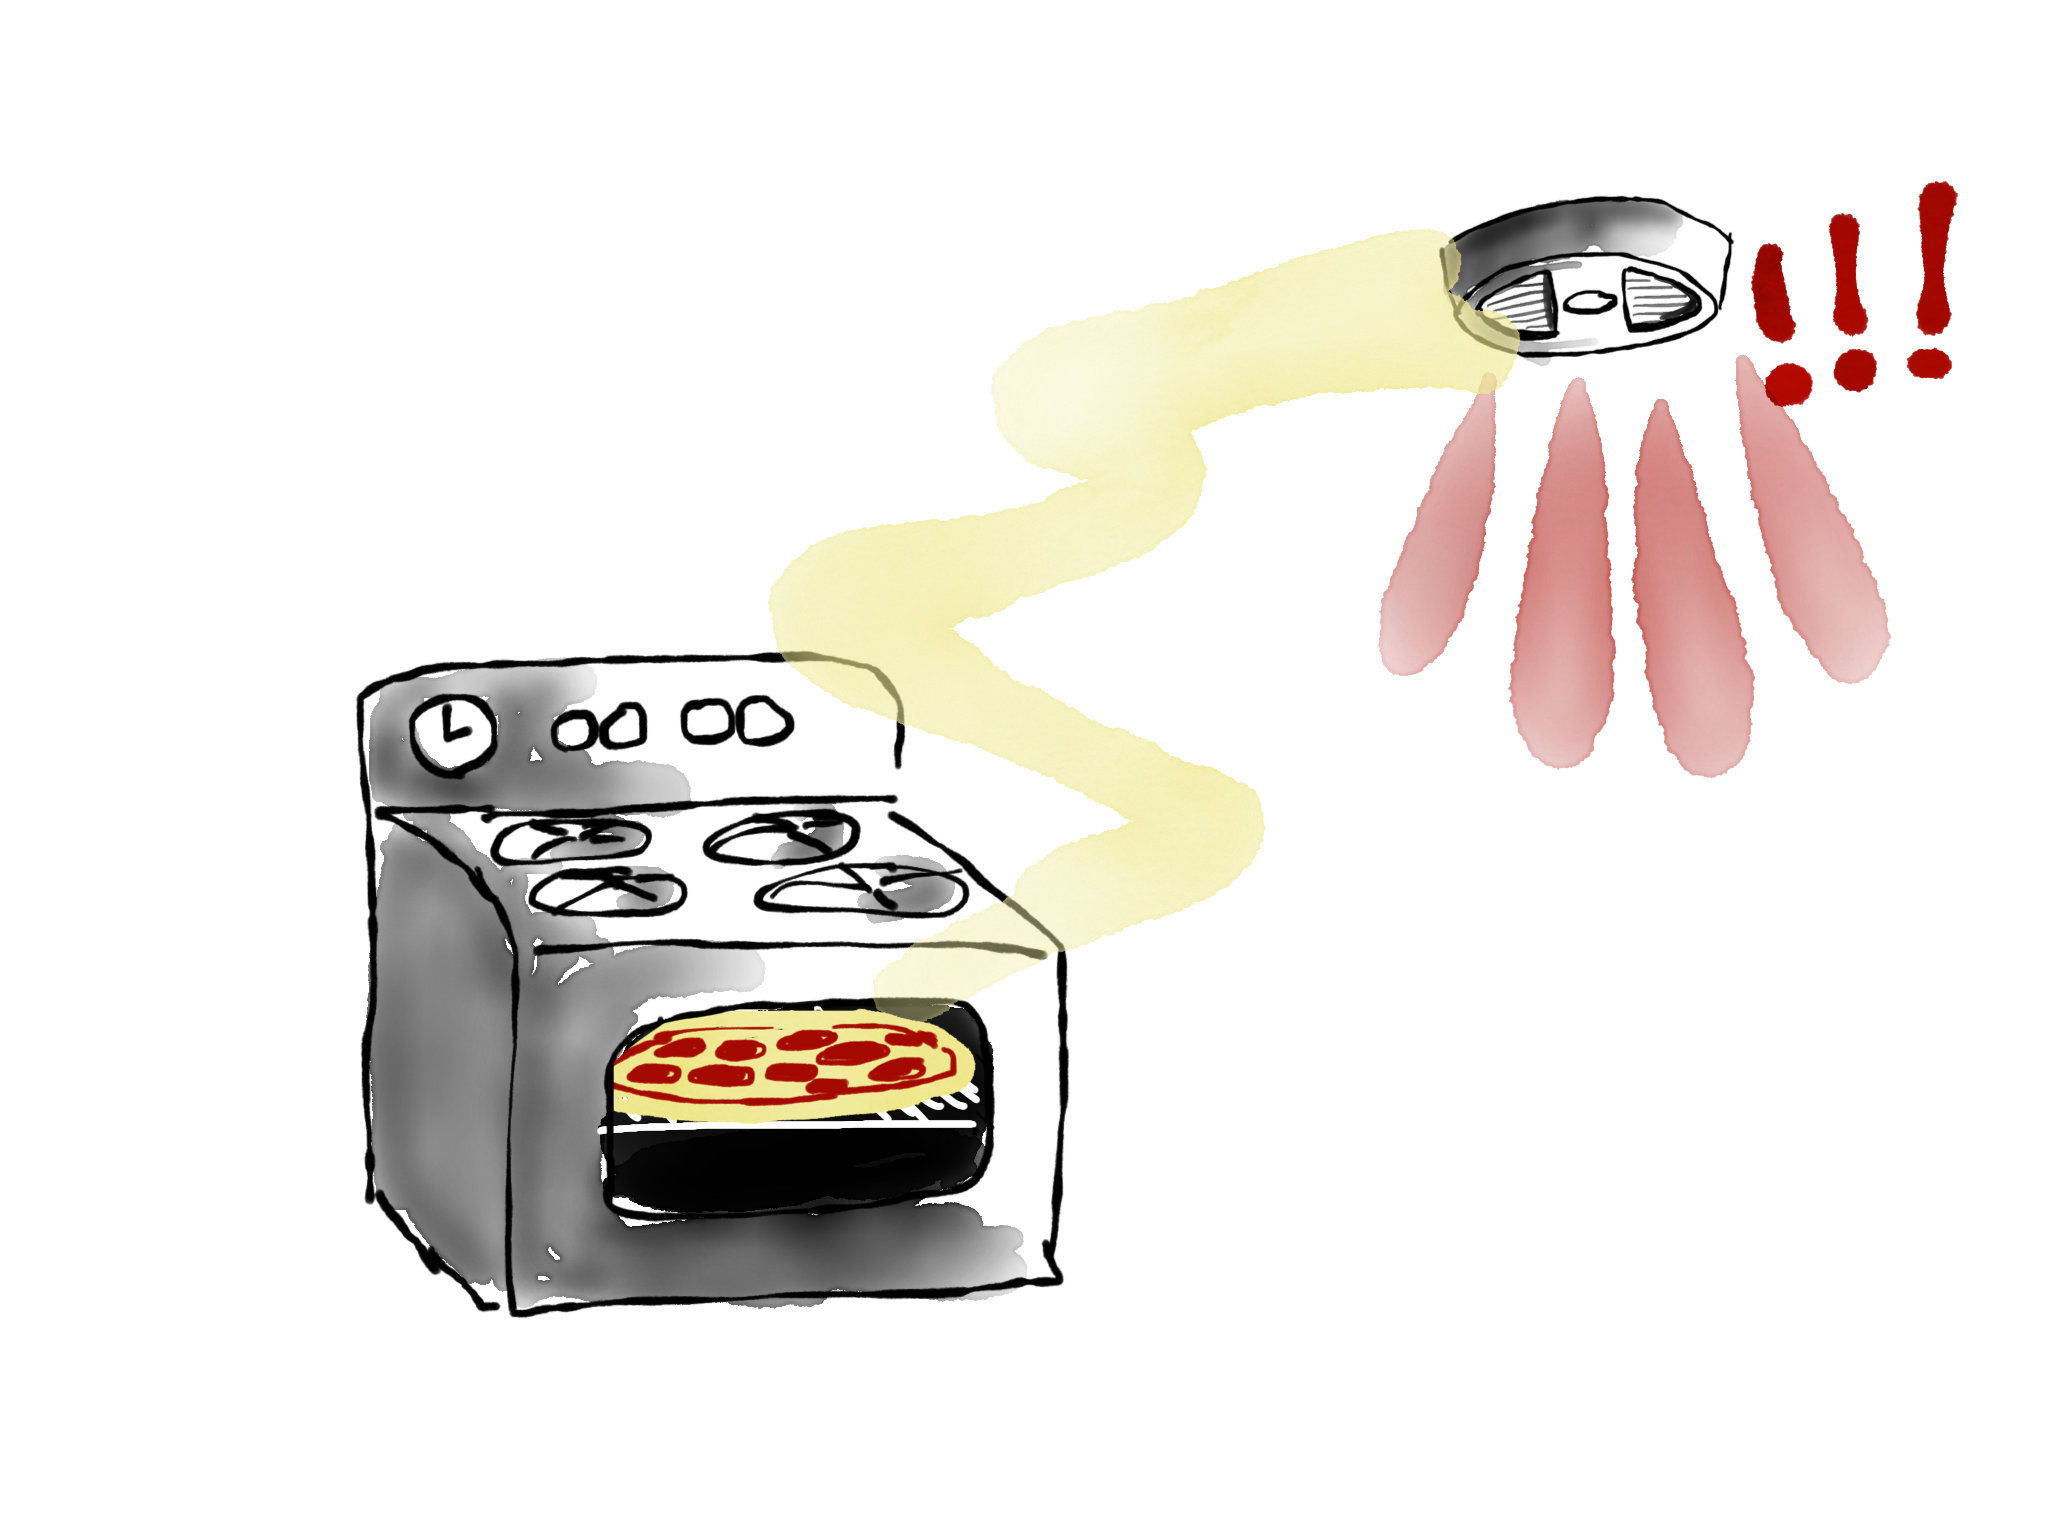 My oven sets off a smoke alarm every time I cook a pizza.